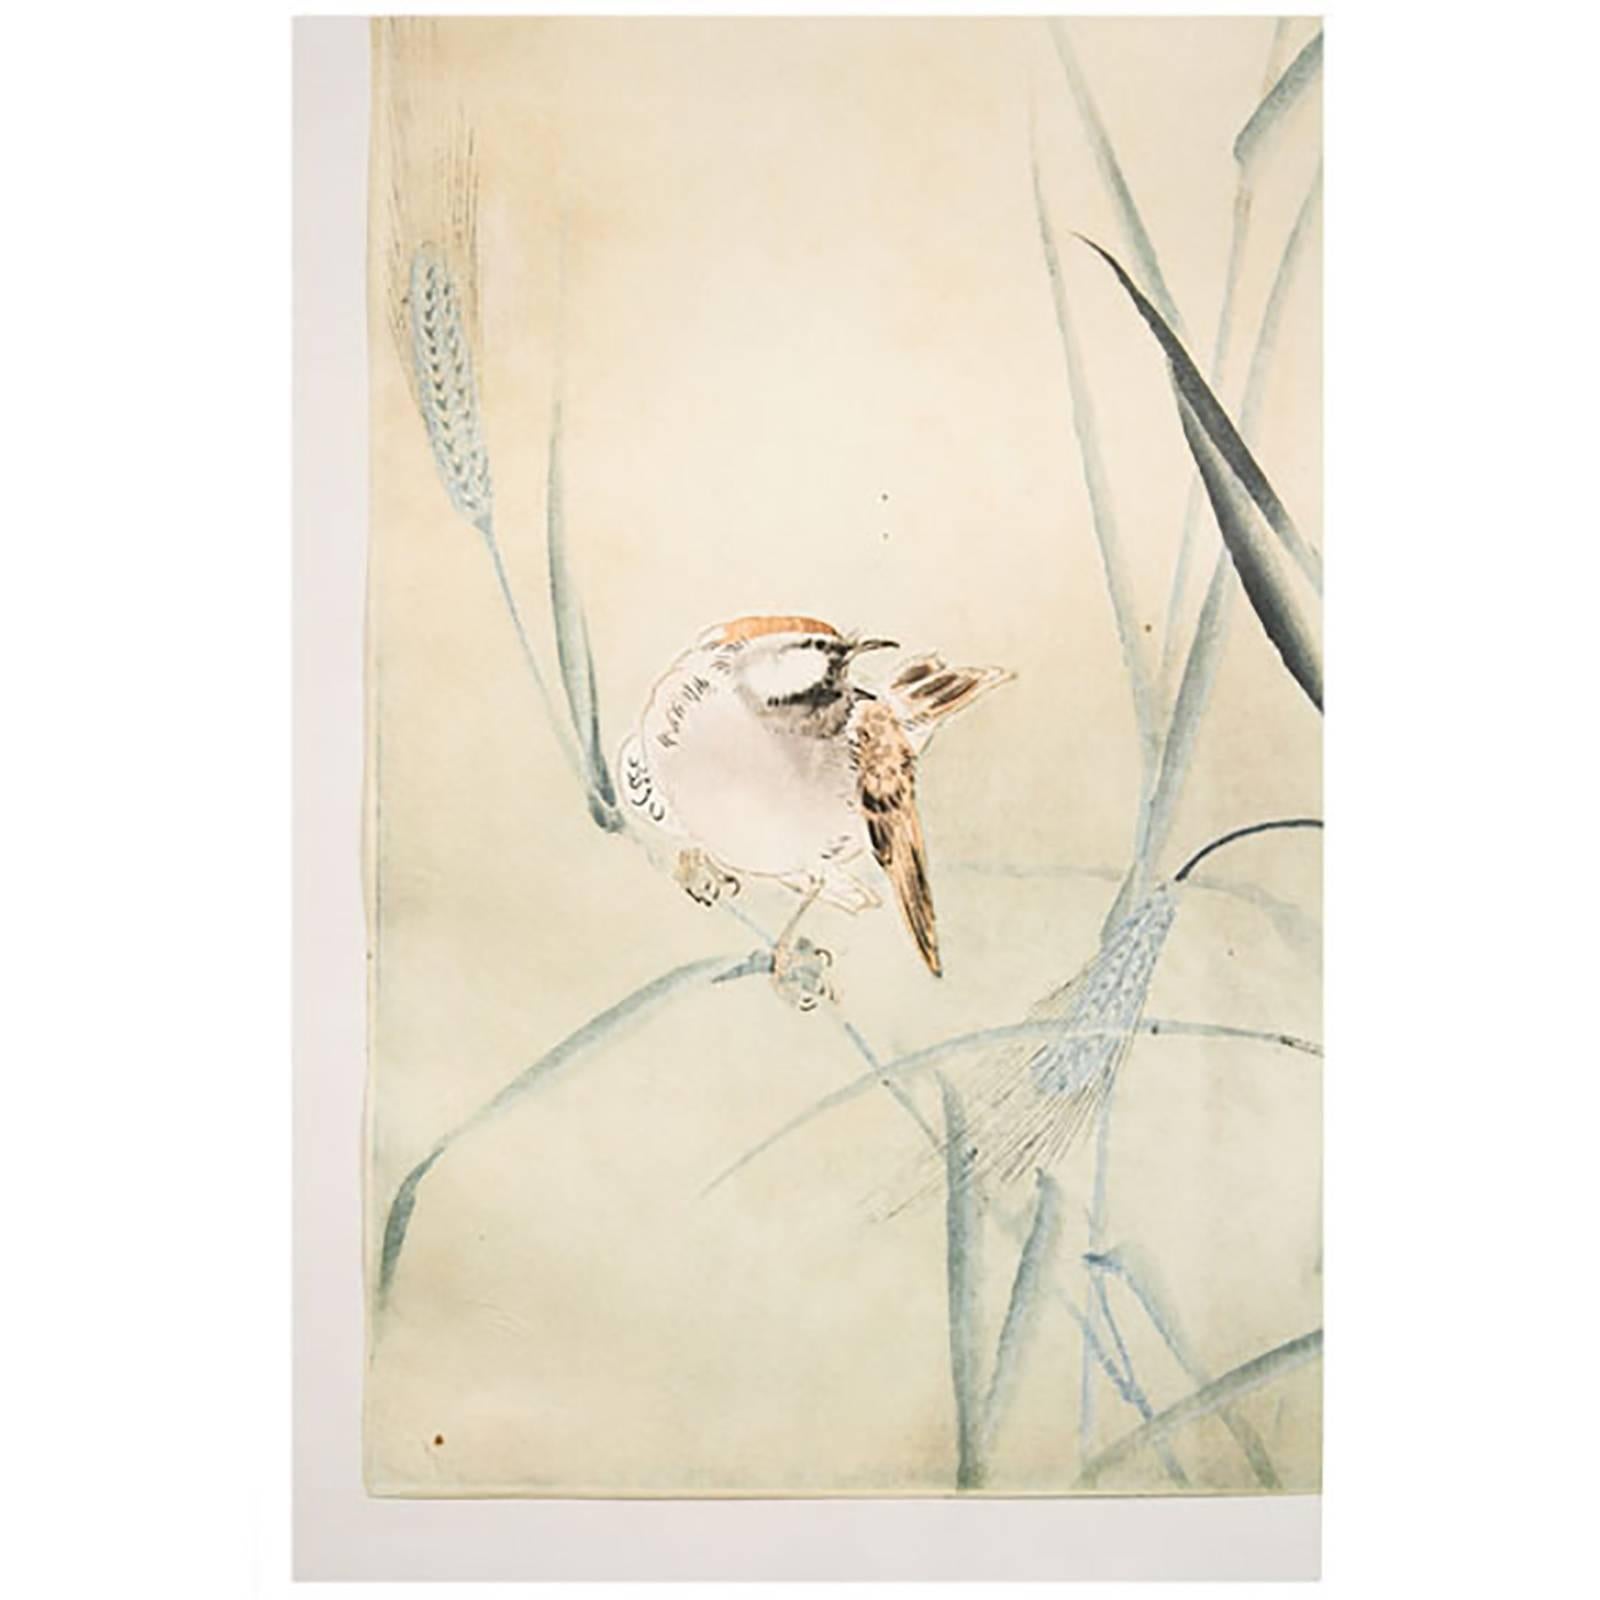 In ancient Japan, ink and watercolor were the most common and popular types of paintings (the techniques were offshoots of calligraphy) and are treasured worldwide by connoisseurs. This delicately detailed painting was made in Japan over a century